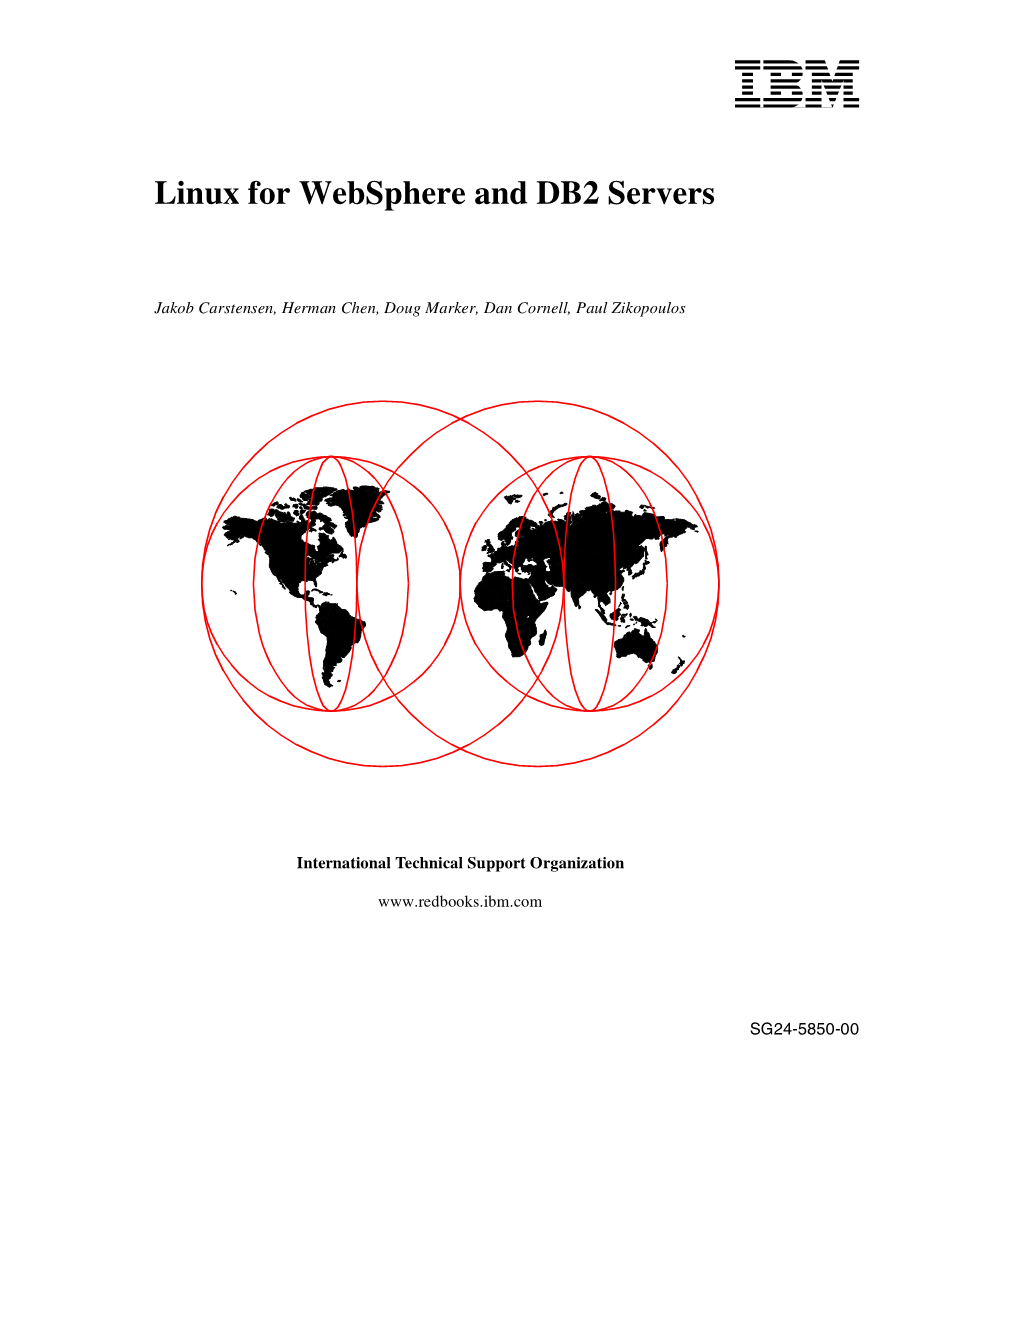 Linux for Websphere and DB2 Servers